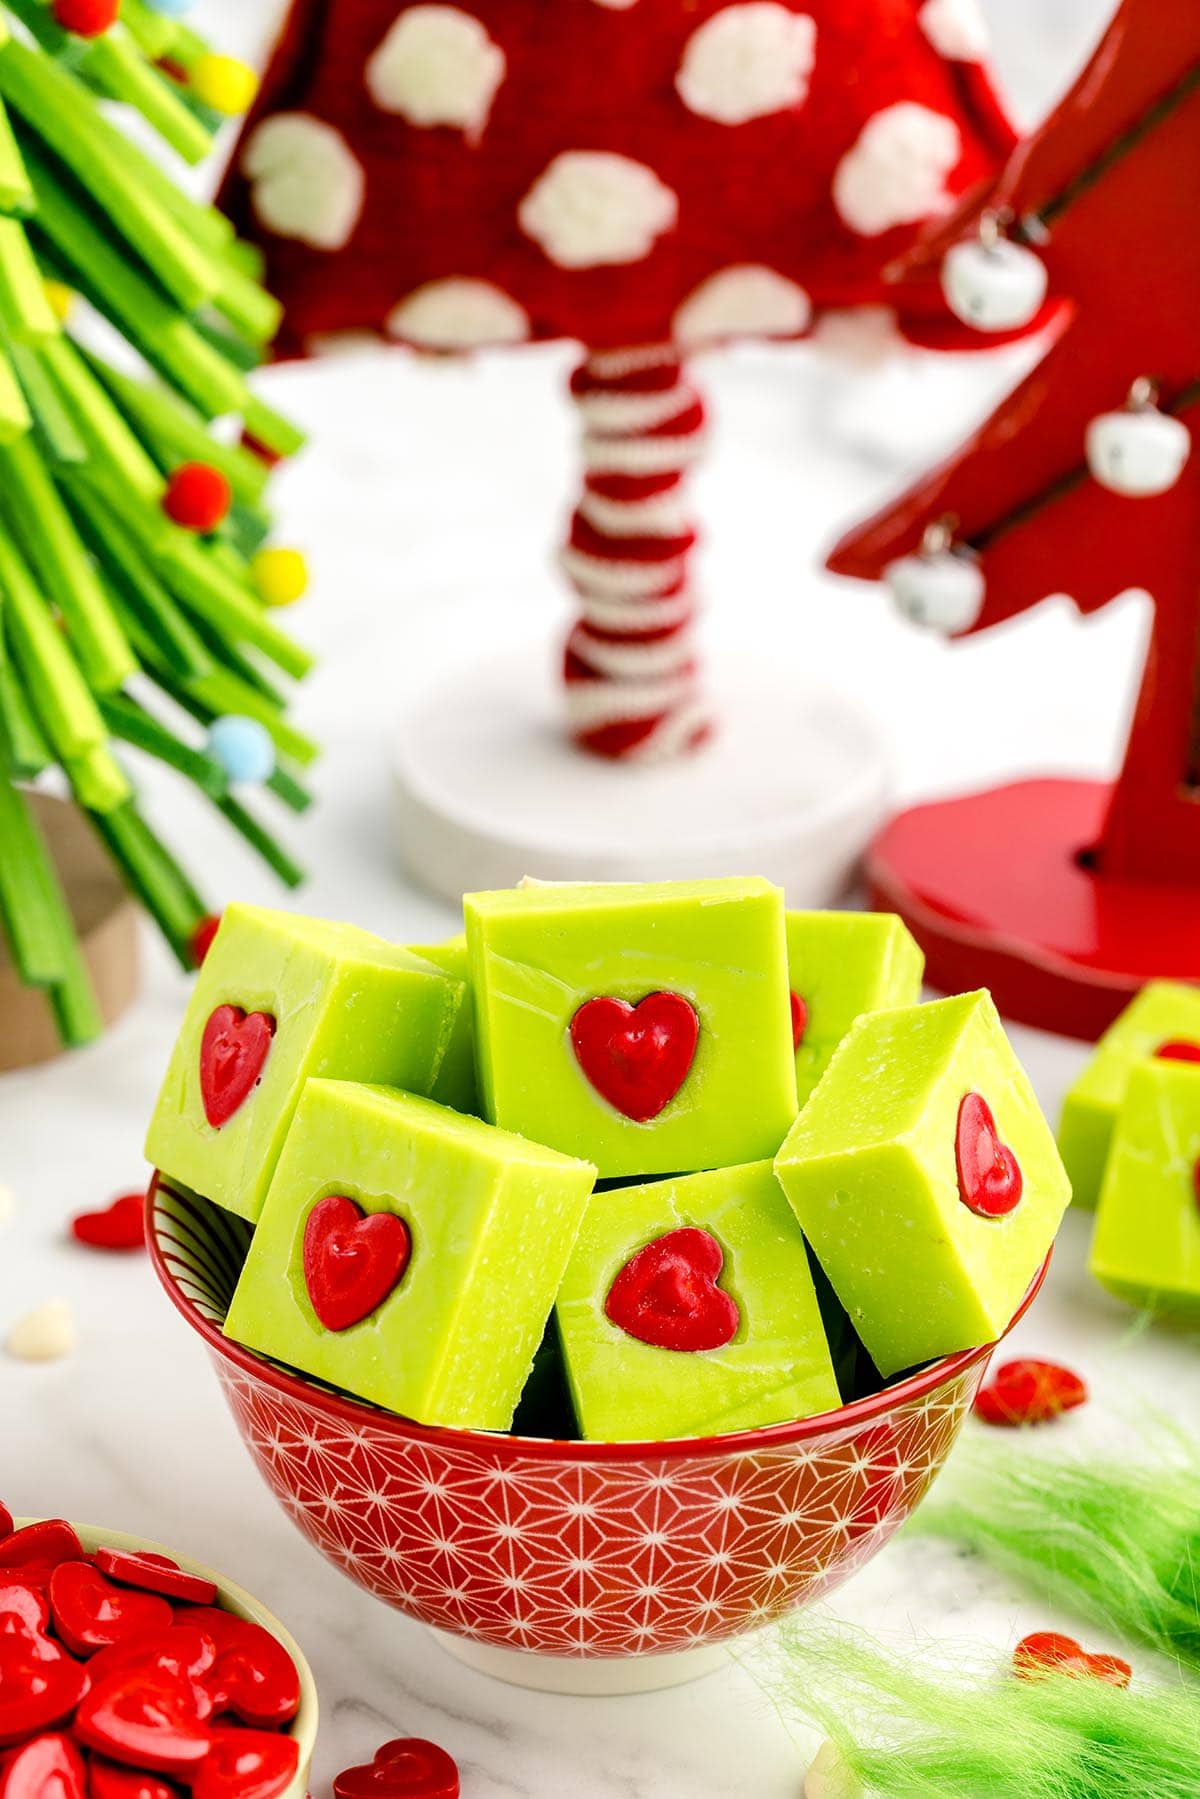 Grinch Fudge in a bowl with red heart candies and some Christmas tree on the background.